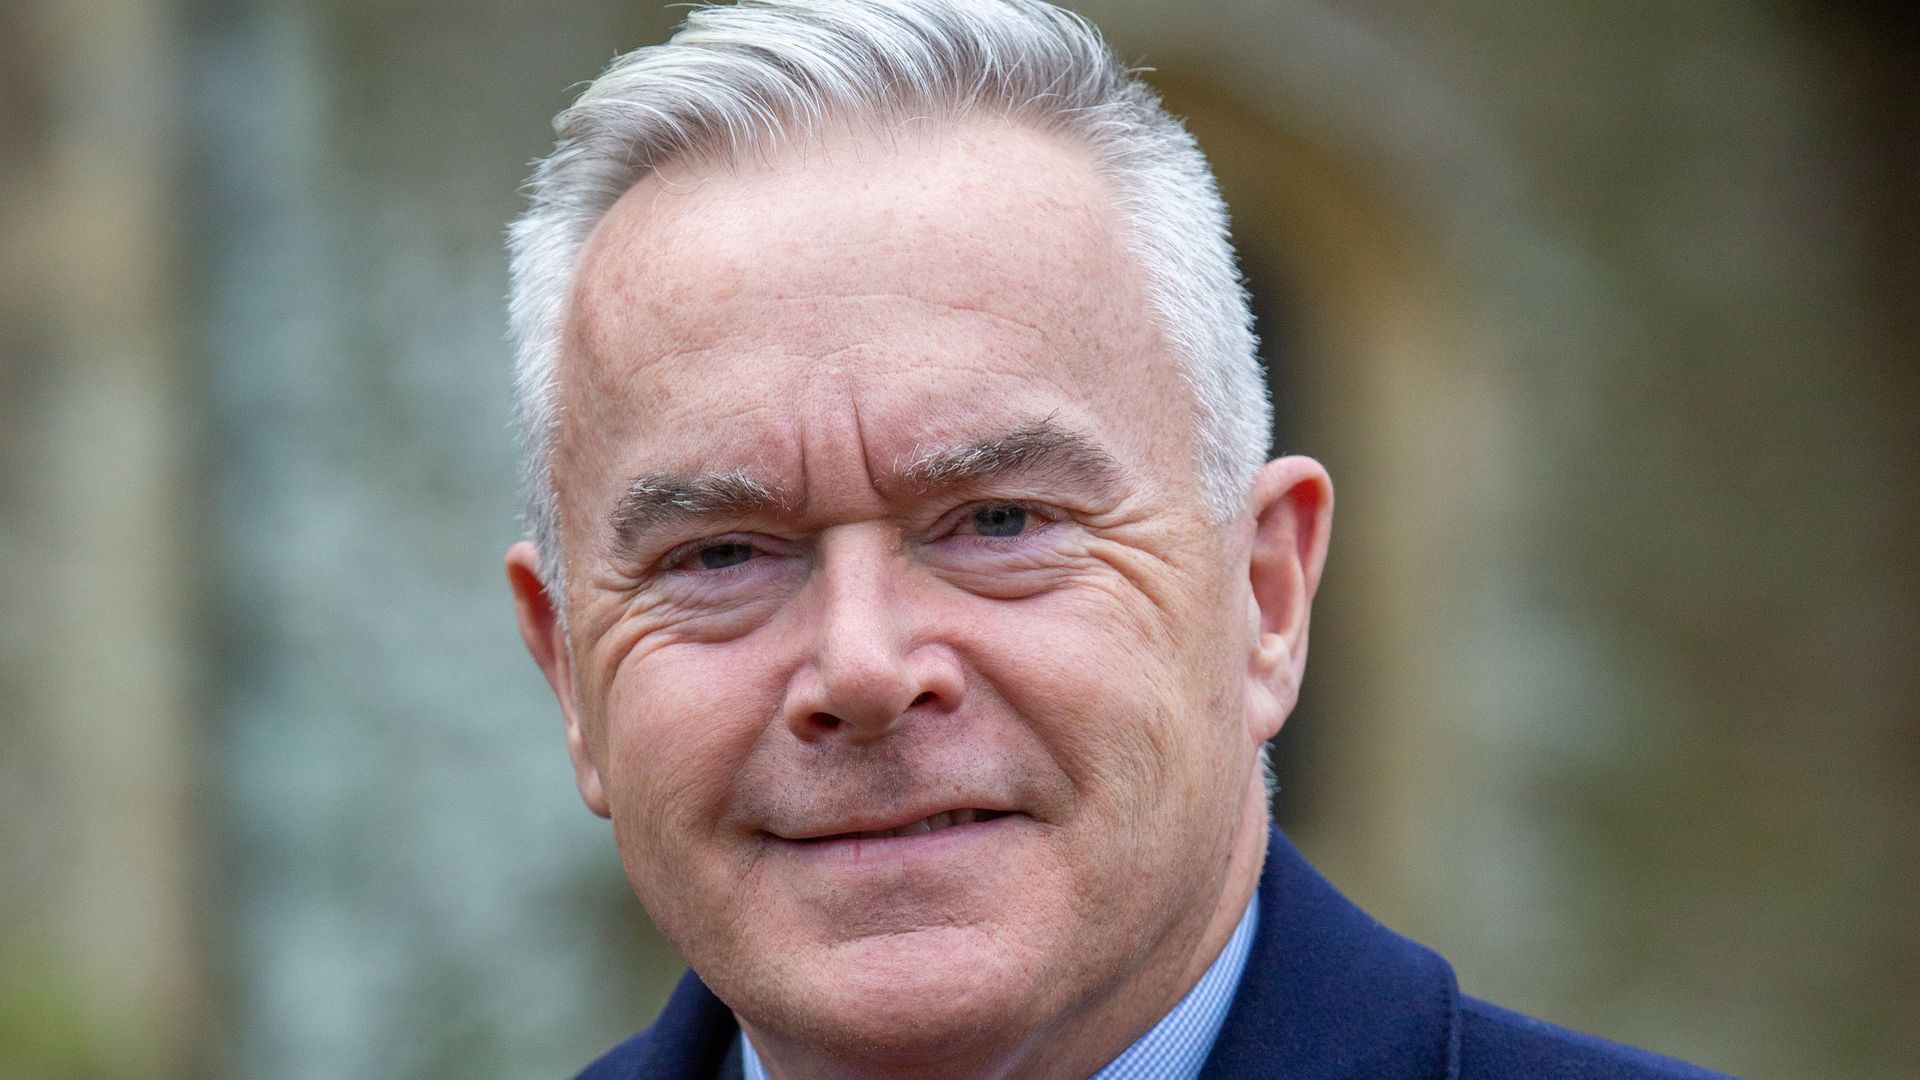 Huw Edwards resigns from BBC on 'medical advice' – details